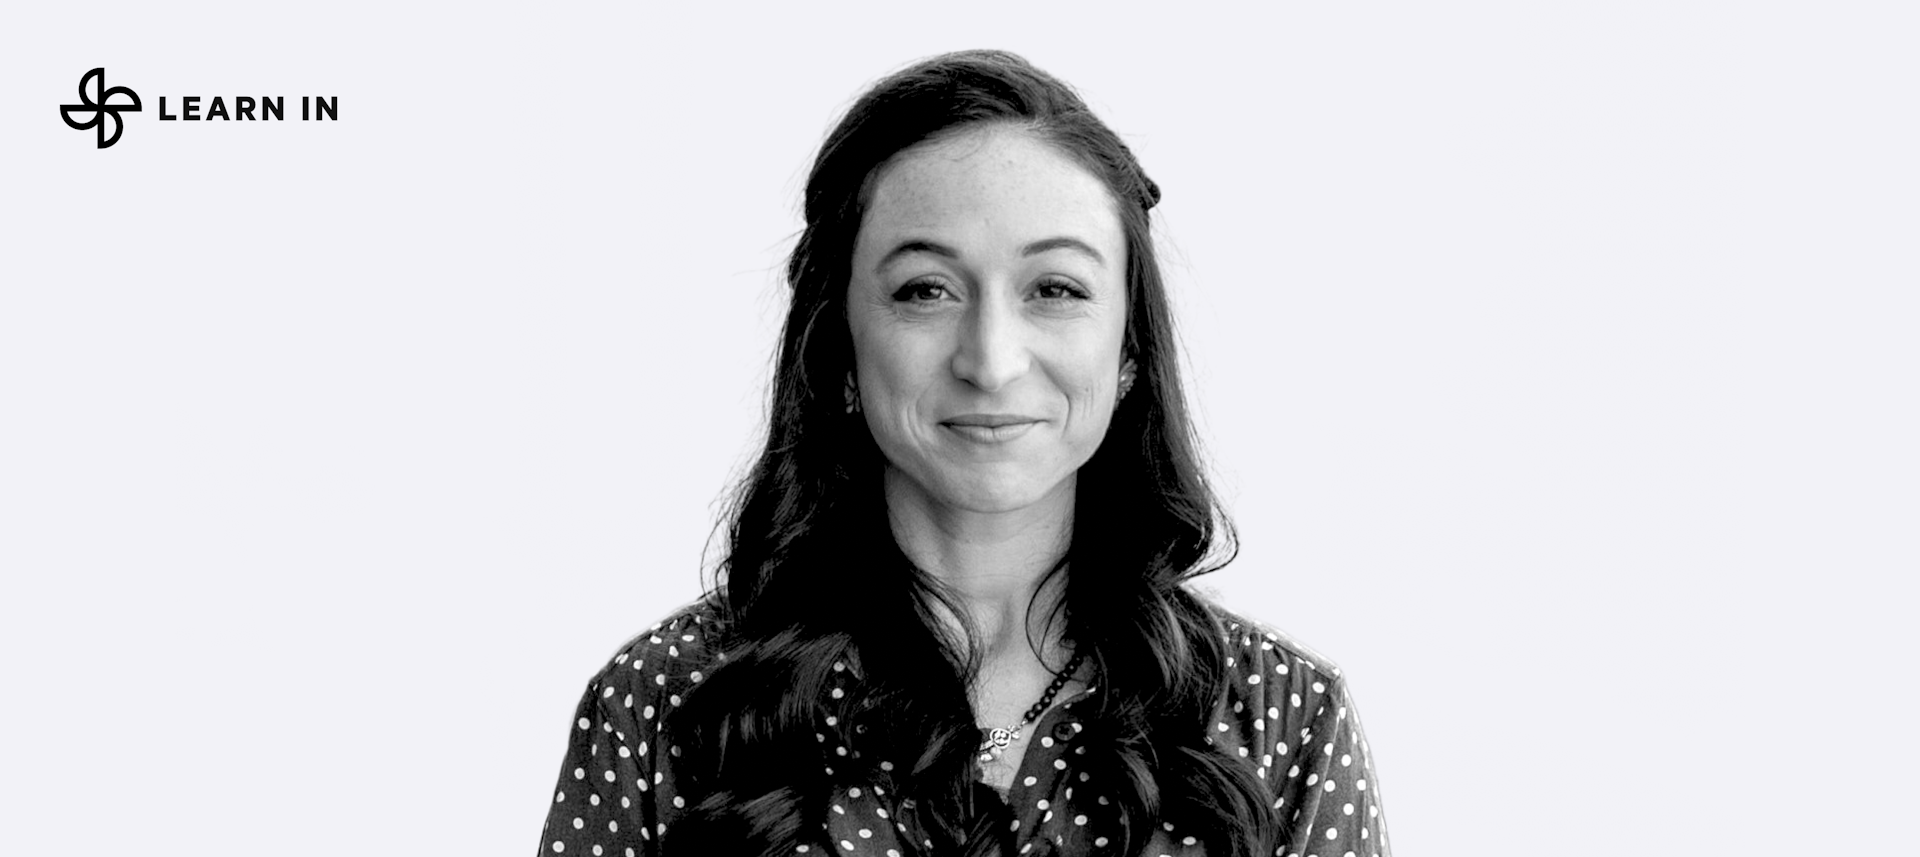 Image of Yael Kaufmann, co-founder & COO of Learn In